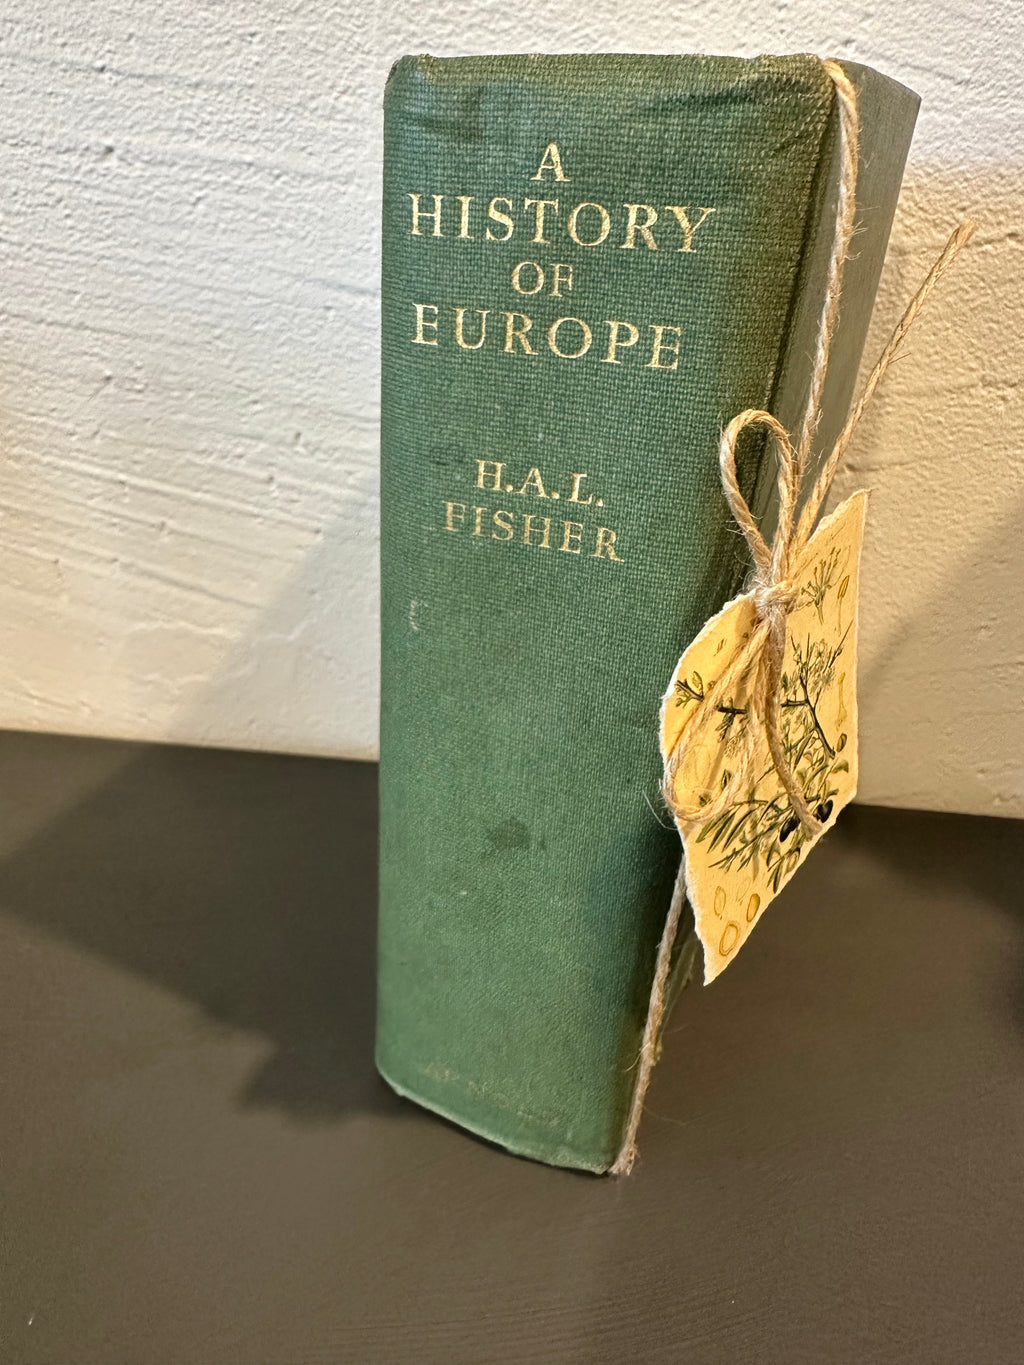 Book Stack green History of Europe